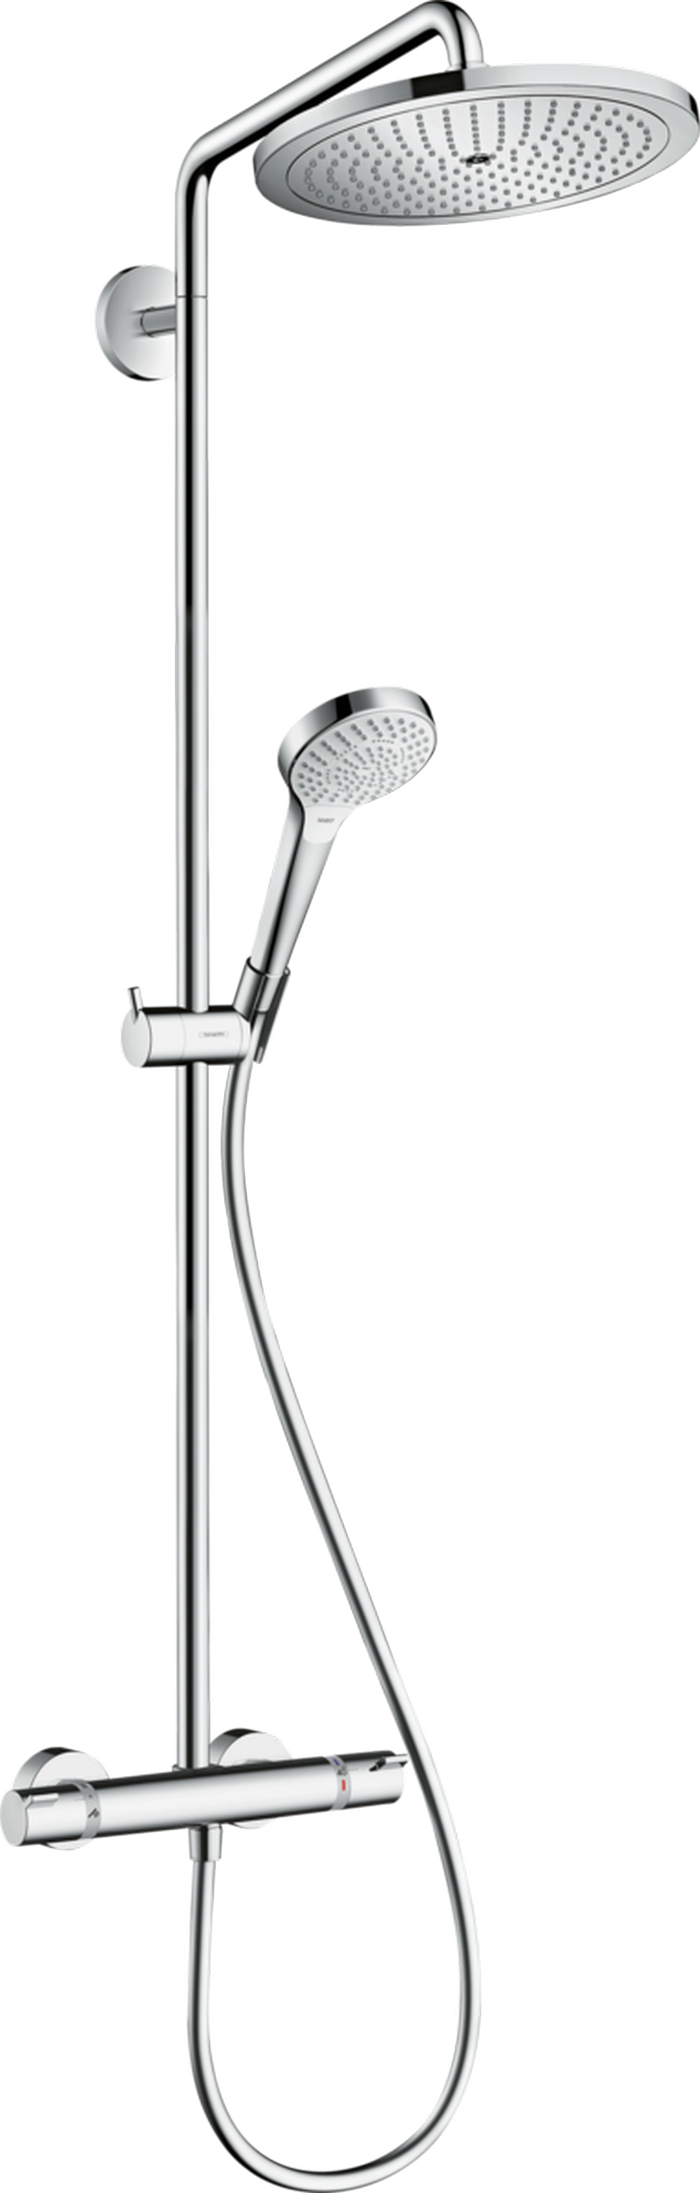 Hansgrohe Croma Select S Showerpipe 280 26790000